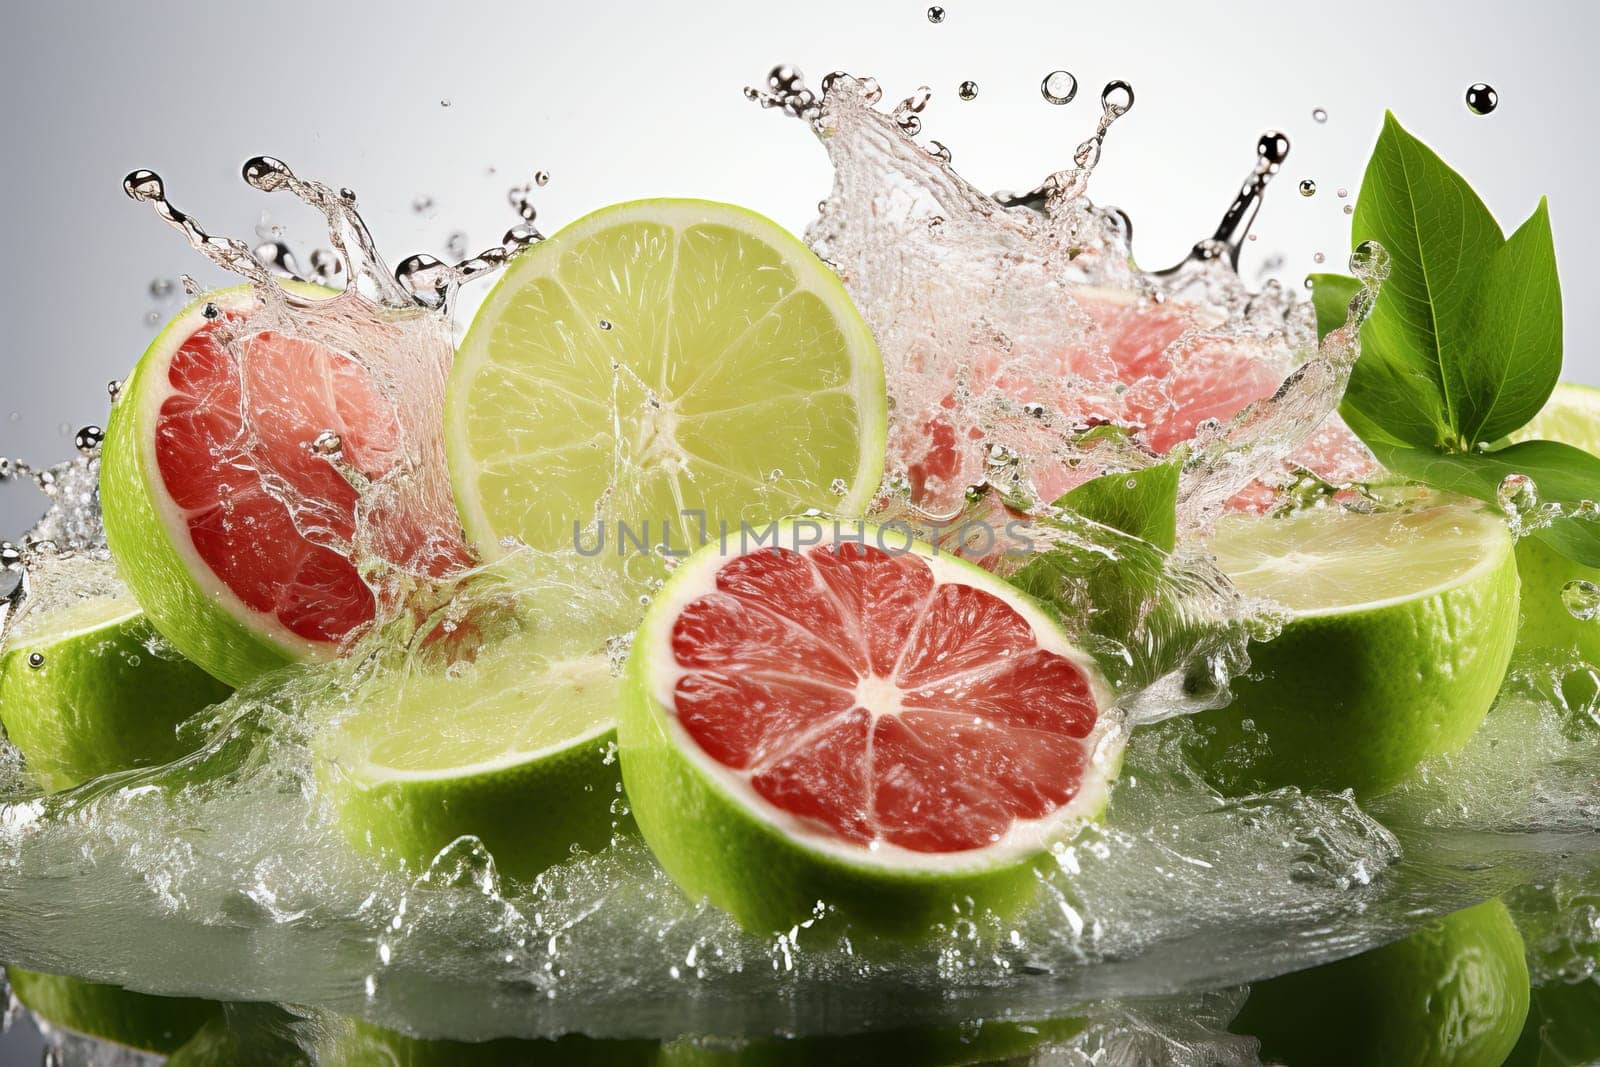 pomelo fruit in splashes of water close-up, banner for pomelo with splashes of water.